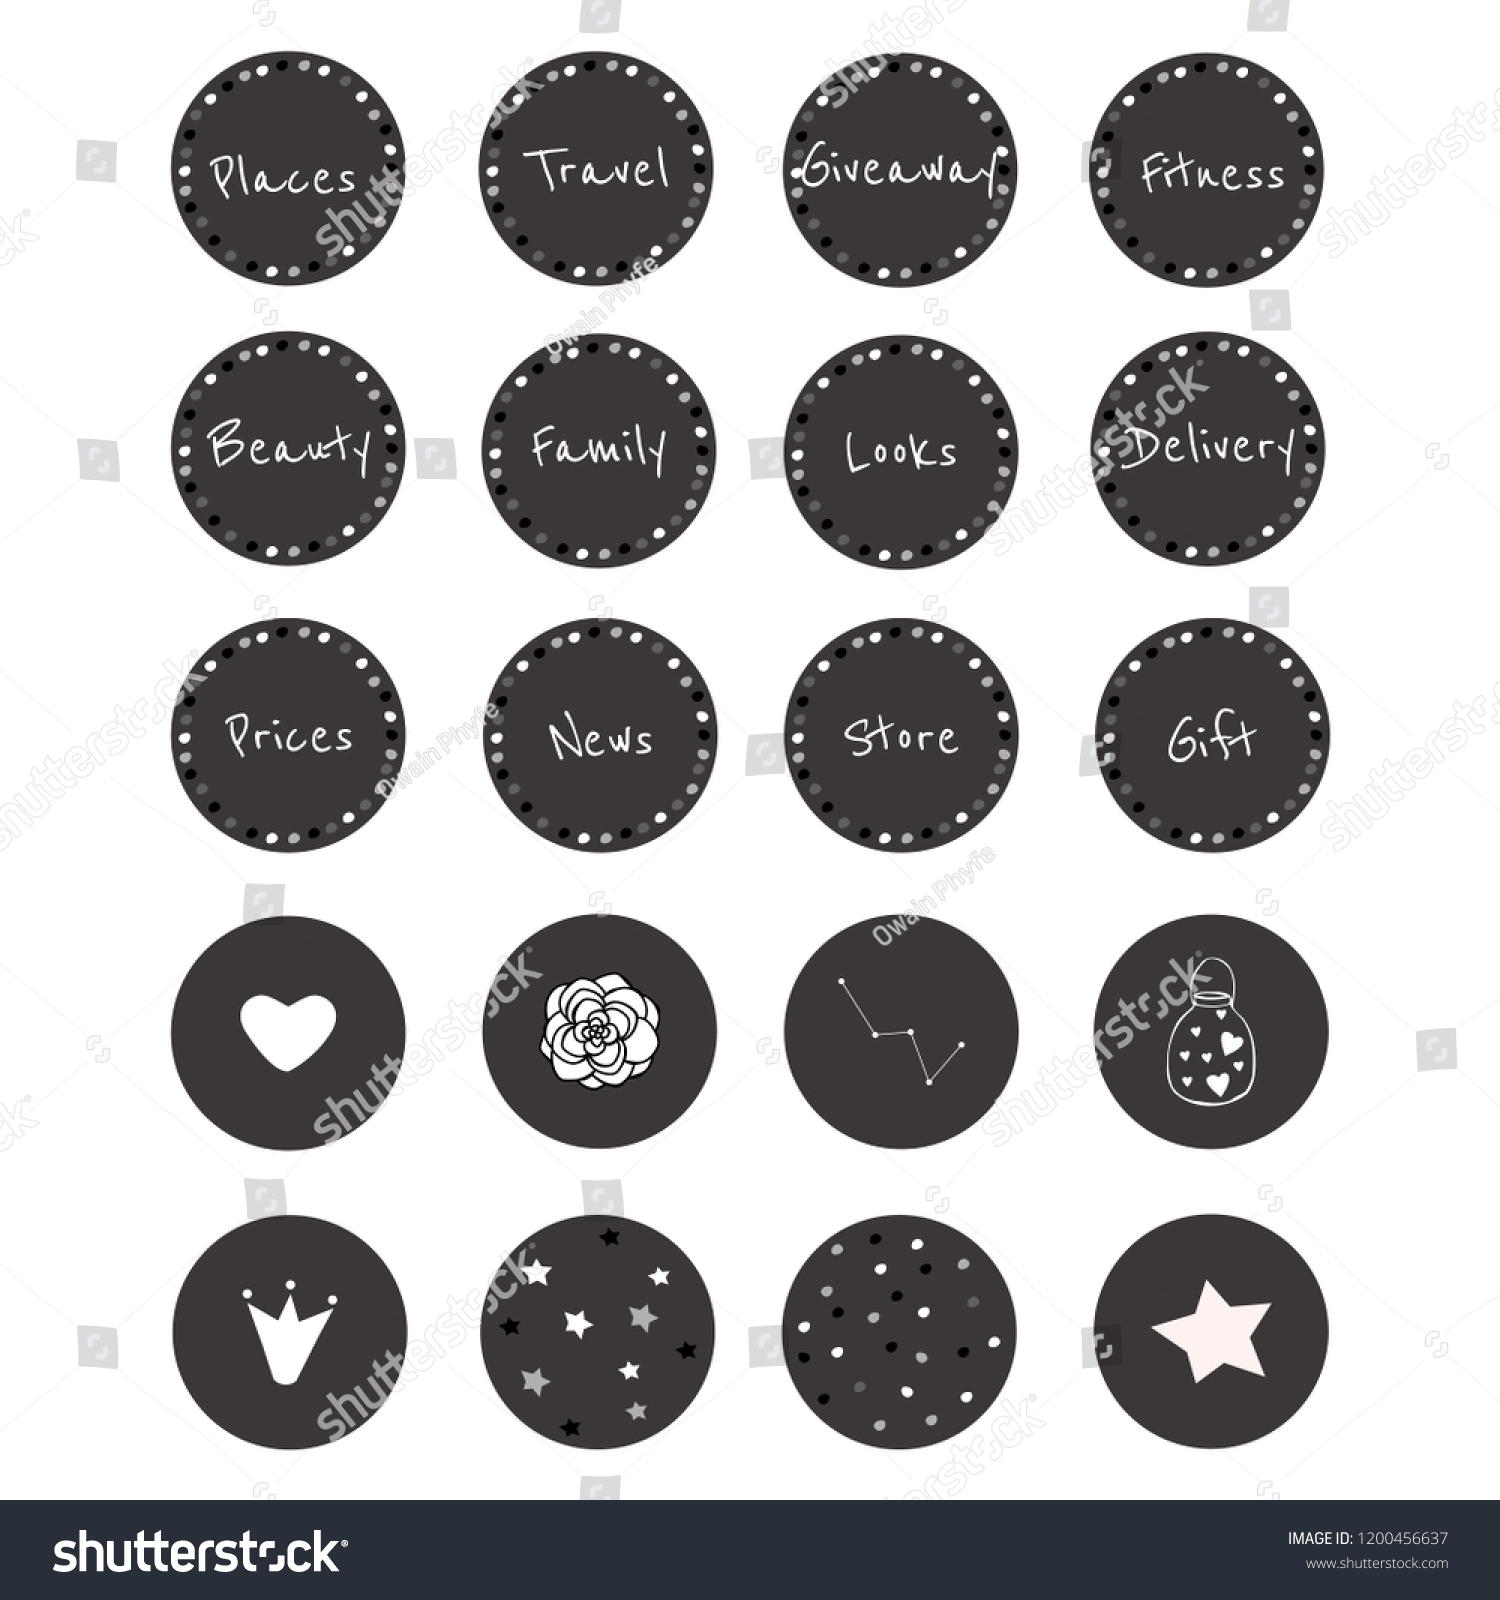 Set of 20 vector icons in gorgeous black and white style for scrapbooking, bullet journalling, social networks, etc. Set including 12 icons with sparkle frame with words and 8 icons with cute images. #1200456637